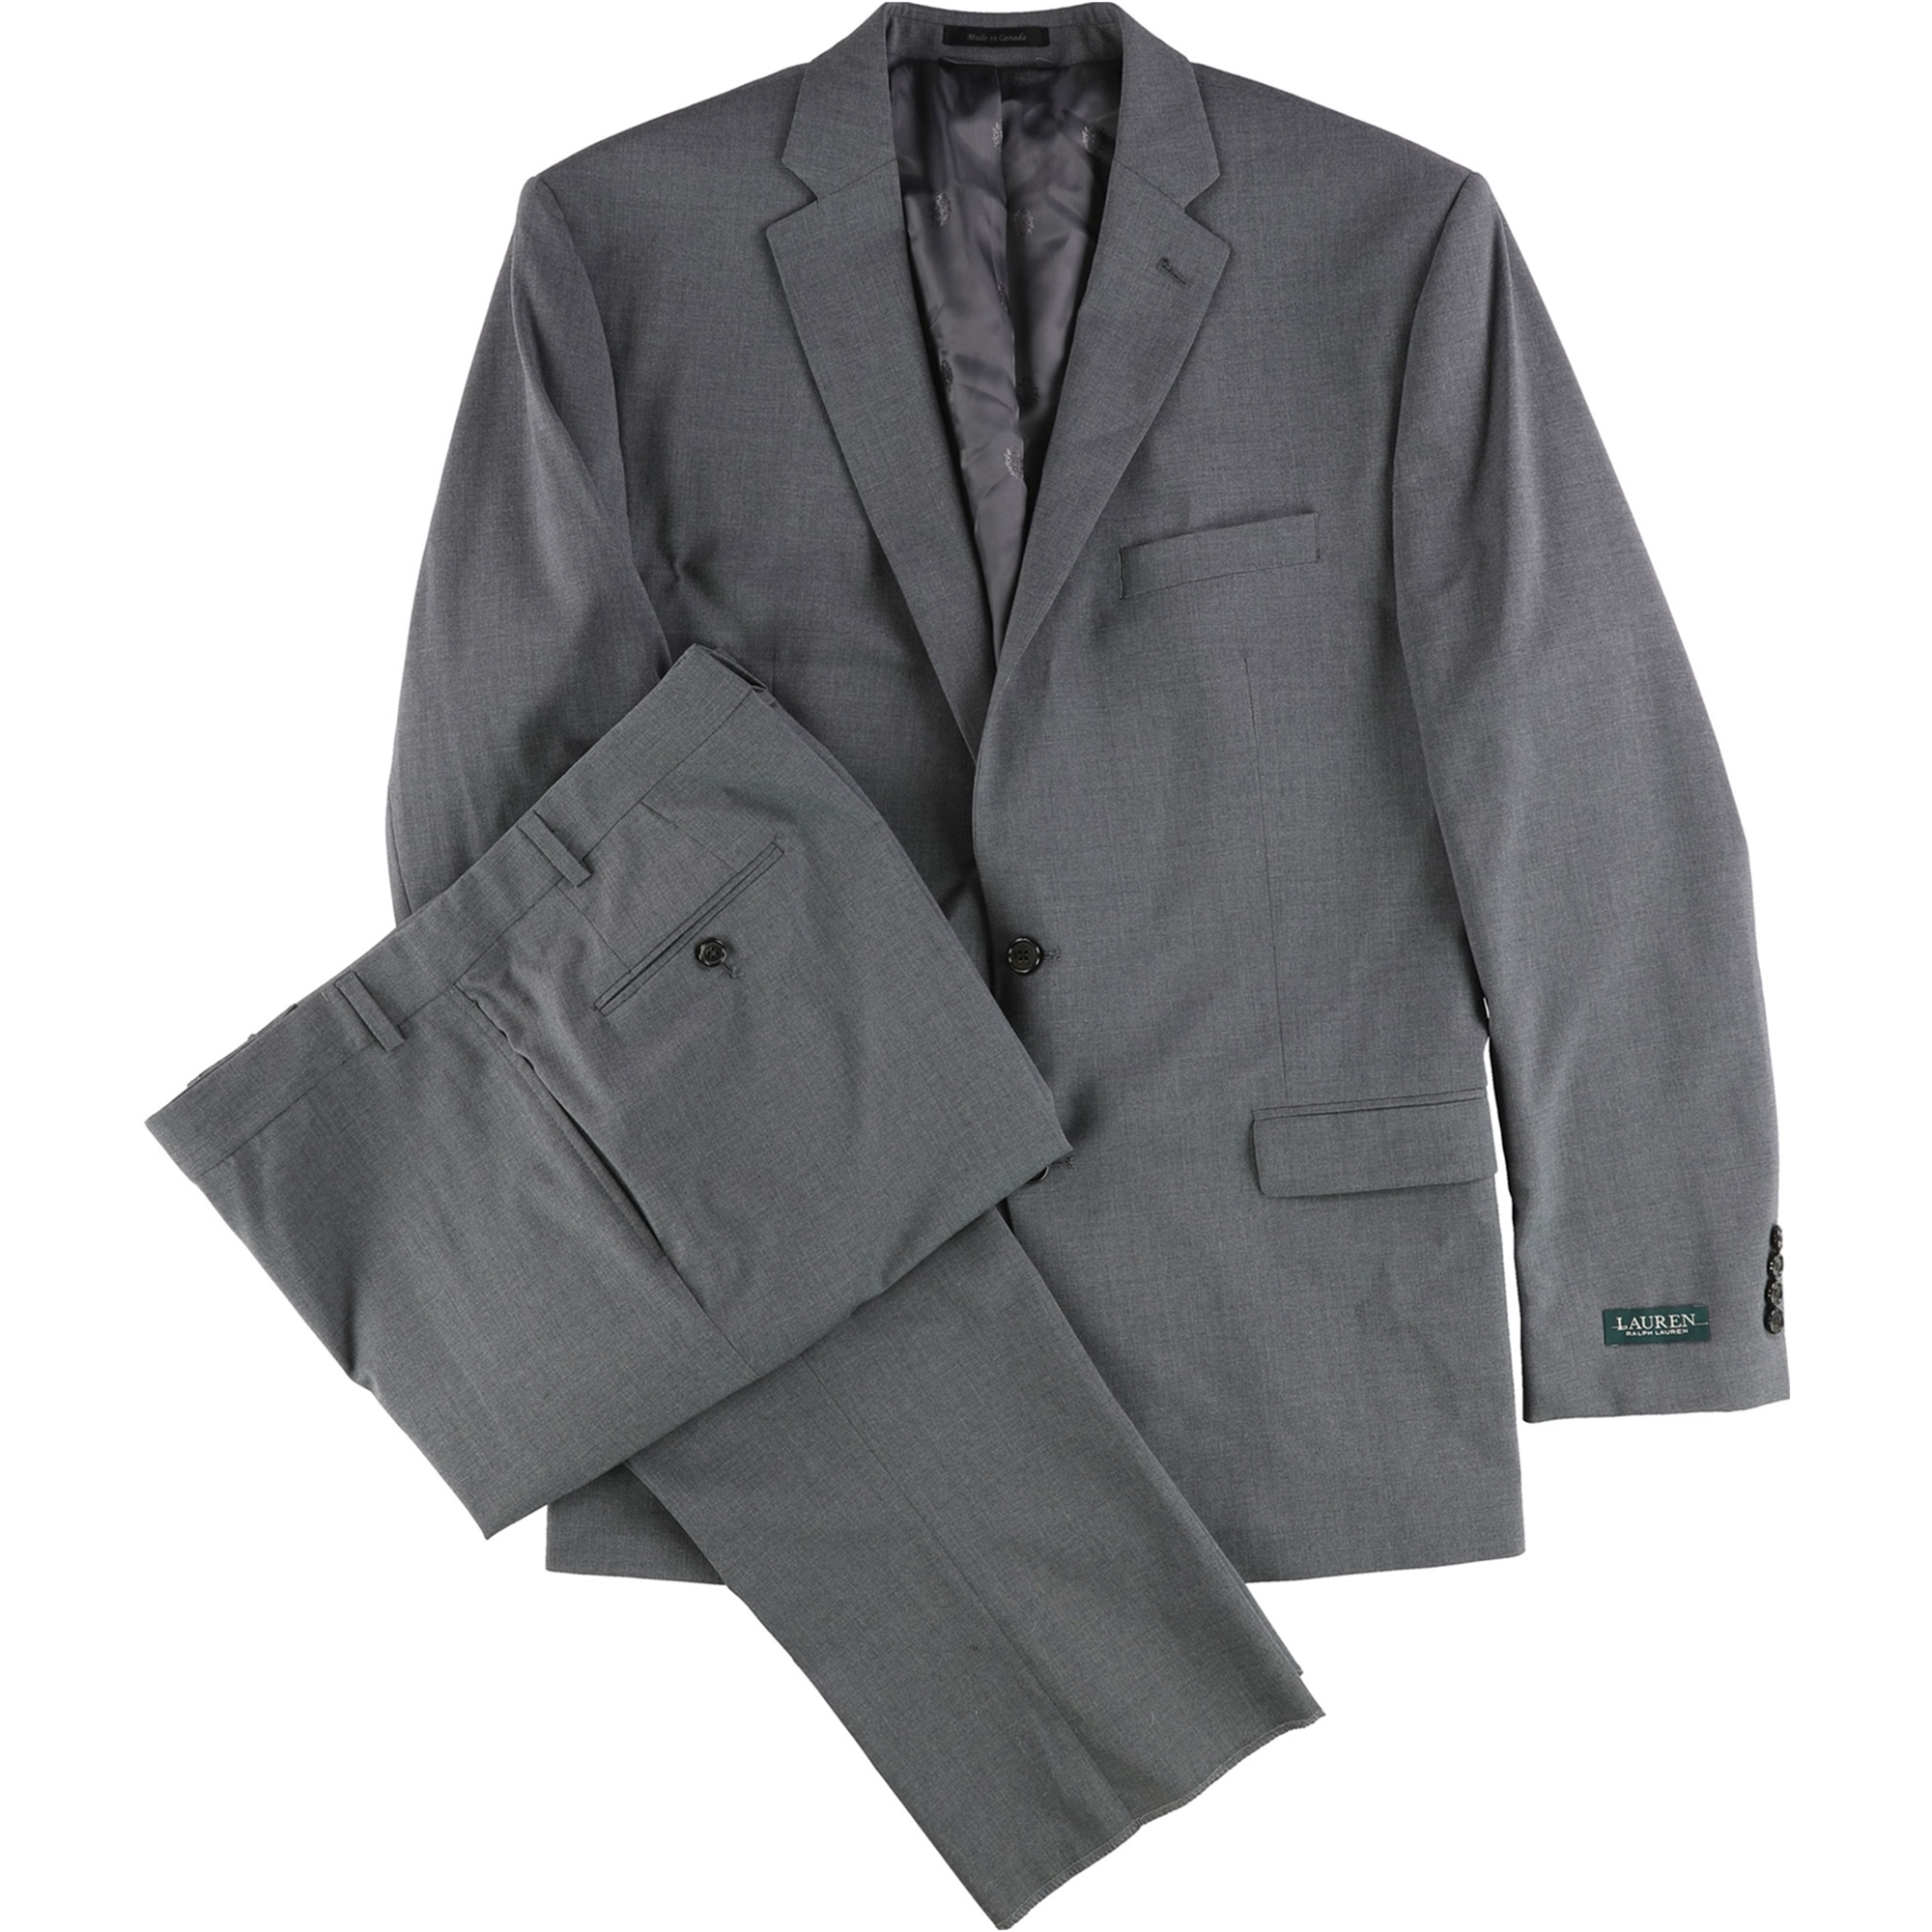 Ralph Lauren Mens Classic-Fit Two Button Formal Suit mediumgrey 38/Unfinished - image 1 of 2